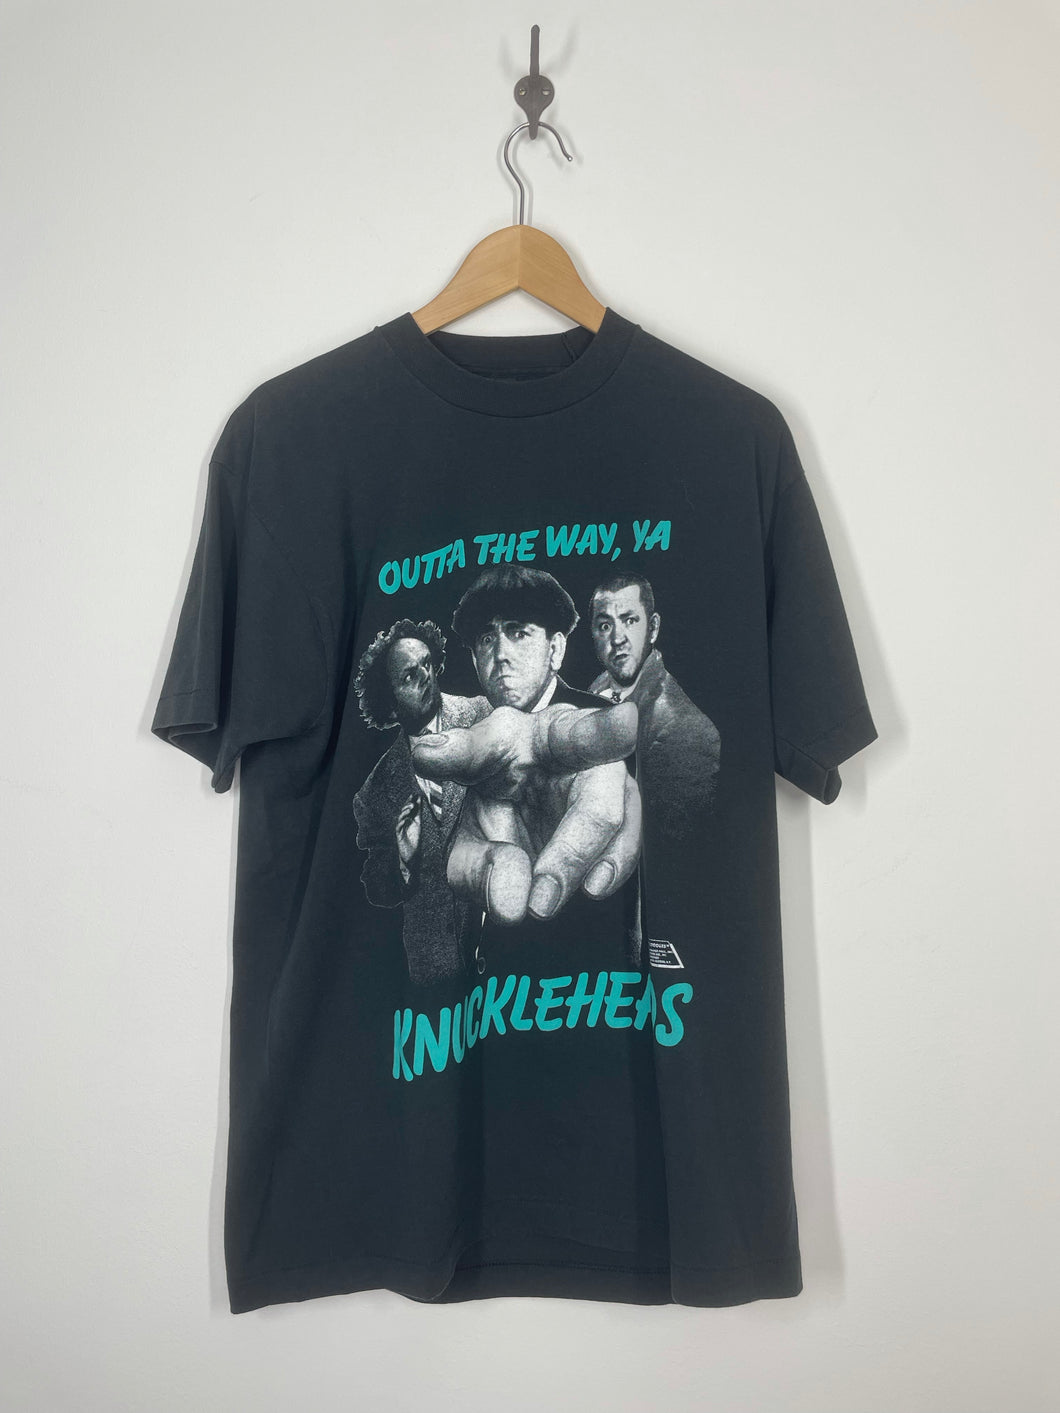 The Three Stooges - 1989 Get Outta the Way Ya Knuckleheads T Shirt - Screen Stars - XL